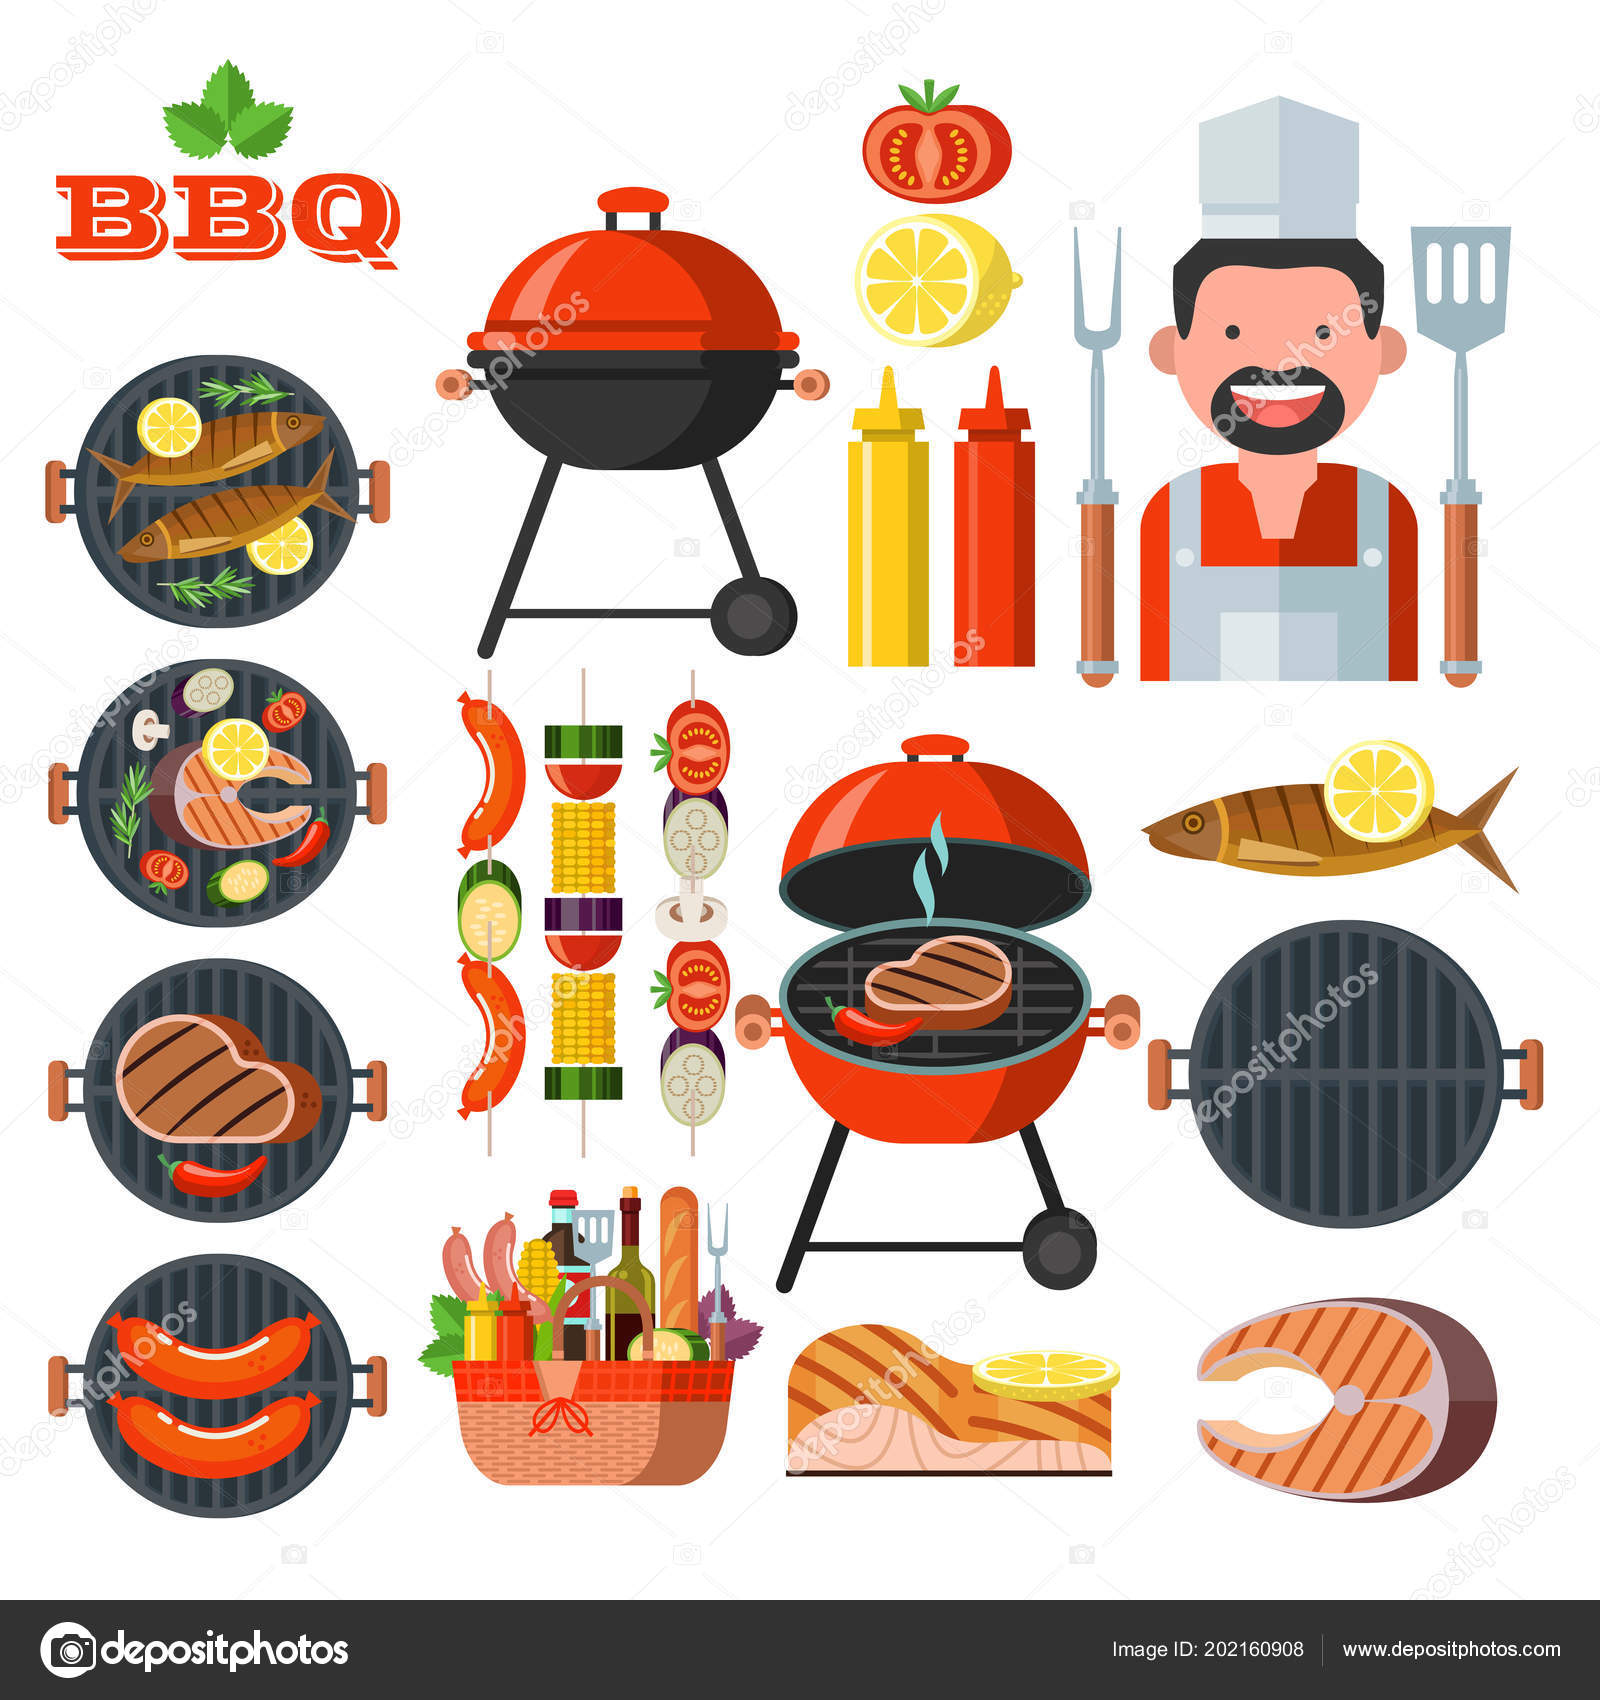 Barbecue Grill Set Colorful Clip Art Cheerful Cook Chef's Shovel Stock  Vector by ©katedemianov 202160908